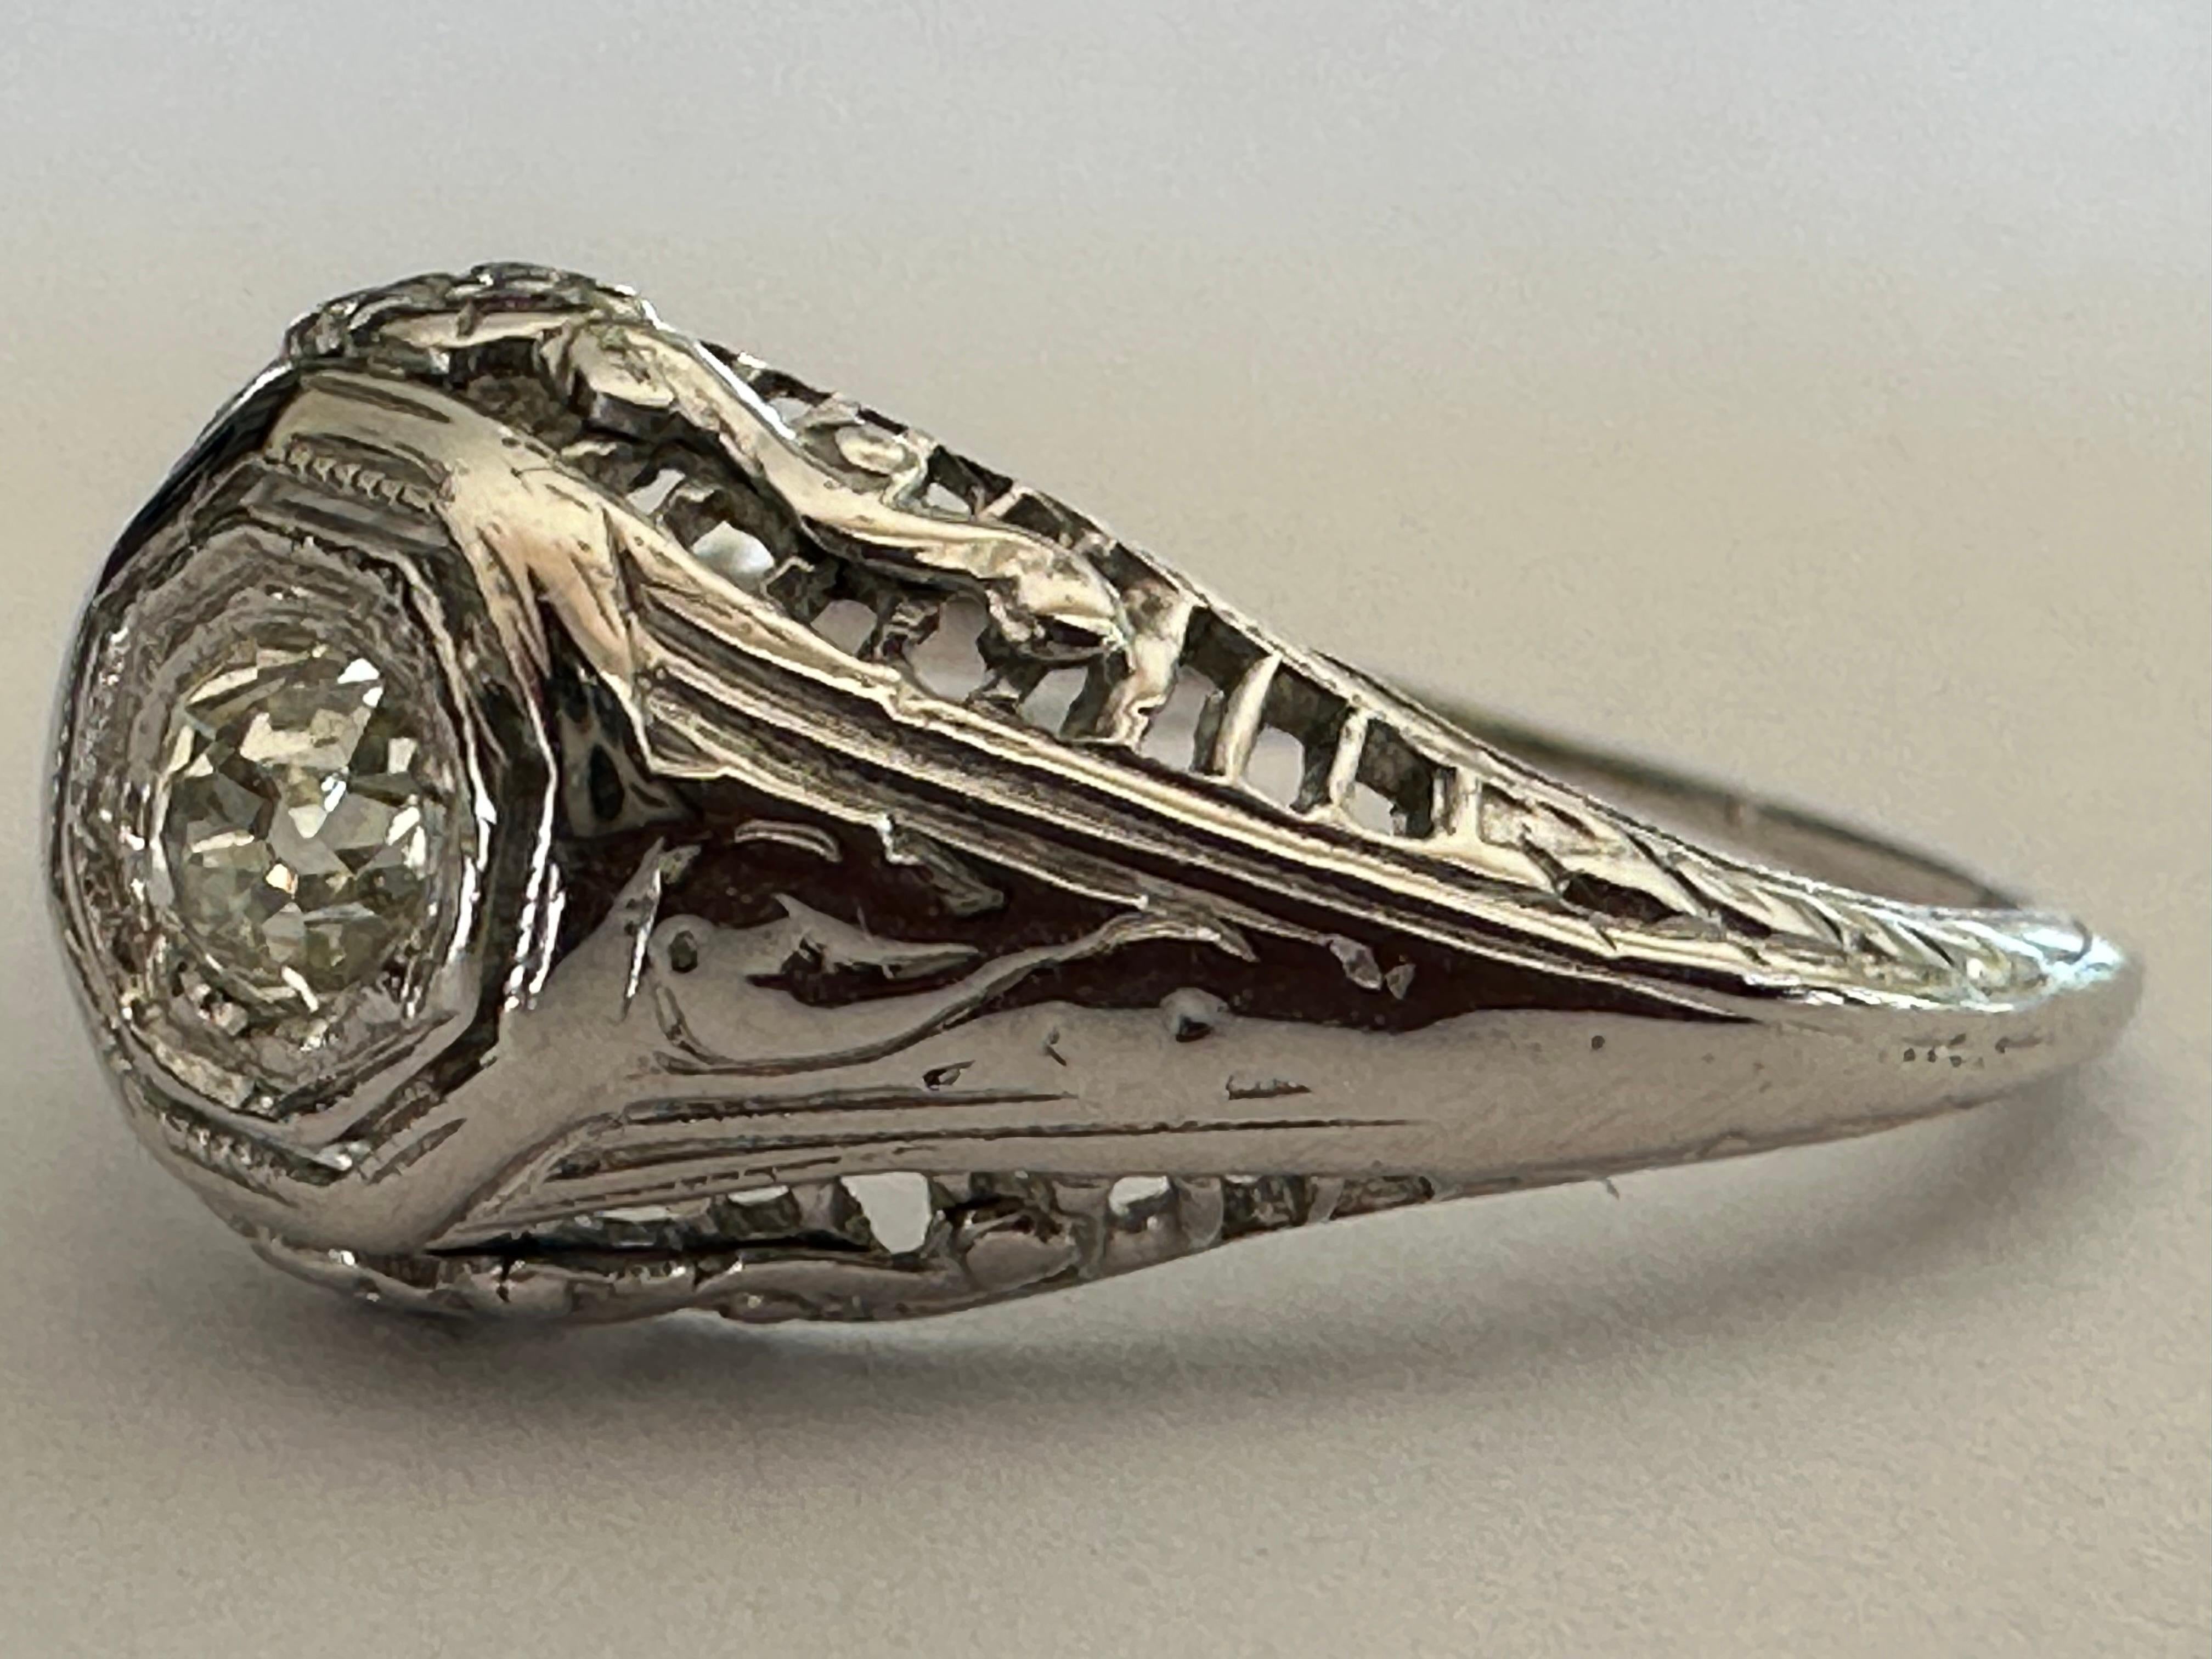 This striking band is crafted from 18k white gold with fine filigree details and set with an Old Mine cut diamond center stone measuring approximately 0.18 carats, IJ color, VS clarity. Circa 1920s. 